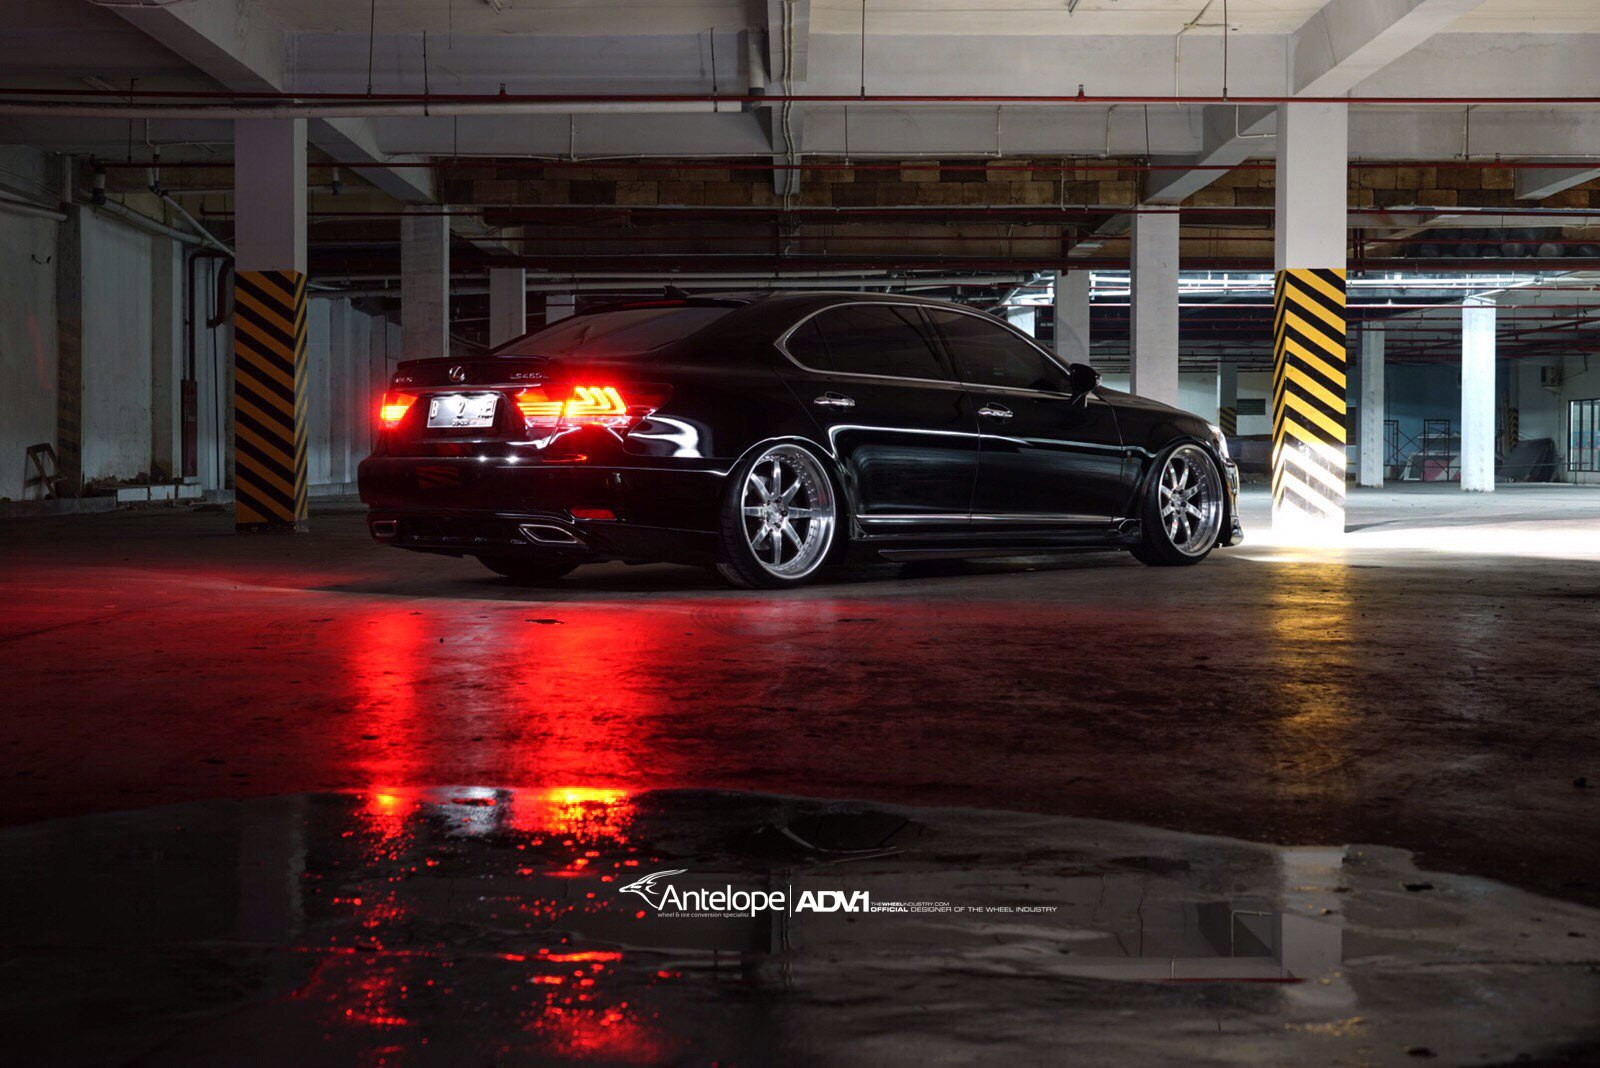 Red LED Taillights on Black Lexus LS - Photo by ADV.1